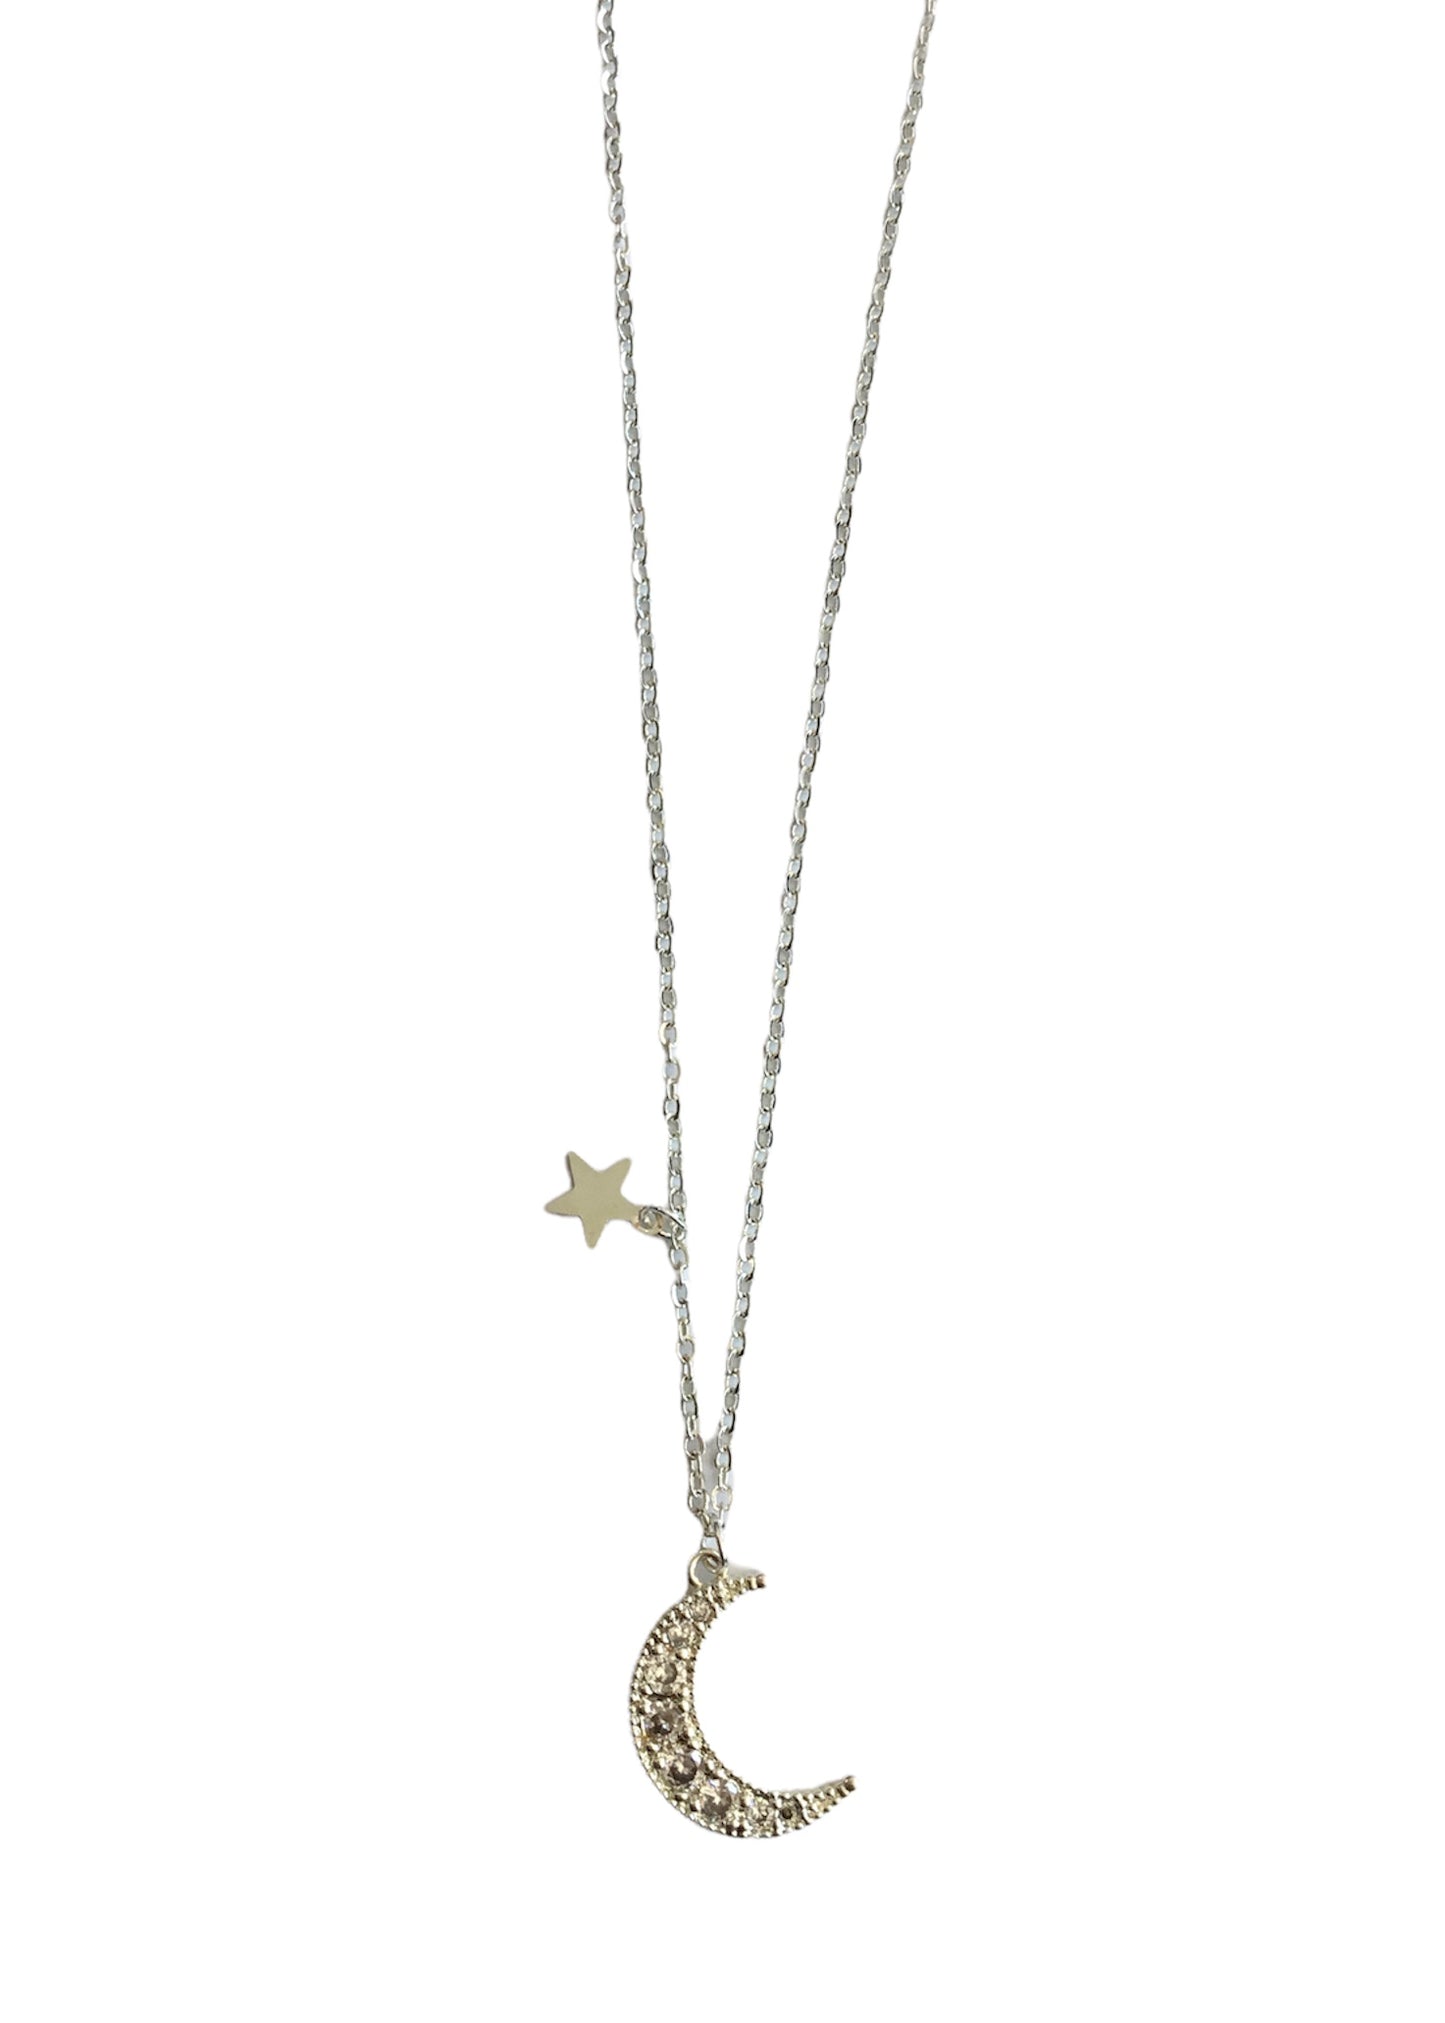 Silver Crescent Moon Charm Necklace with Small Star Pendant